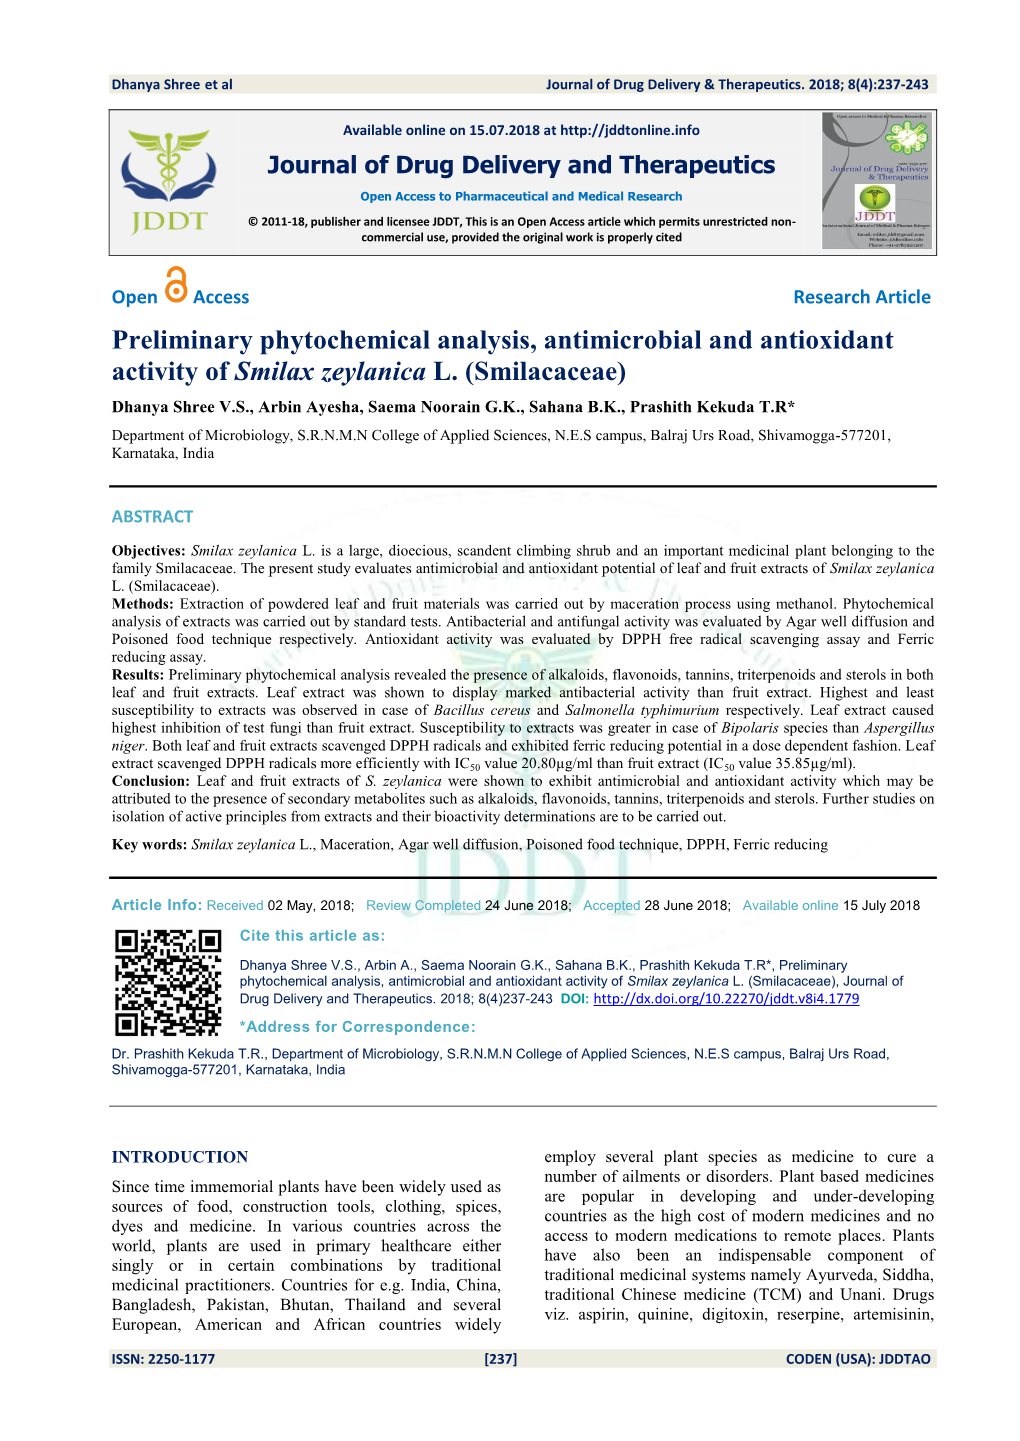 Preliminary Phytochemical Analysis, Antimicrobial and Antioxidant Activity of Smilax Zeylanica L